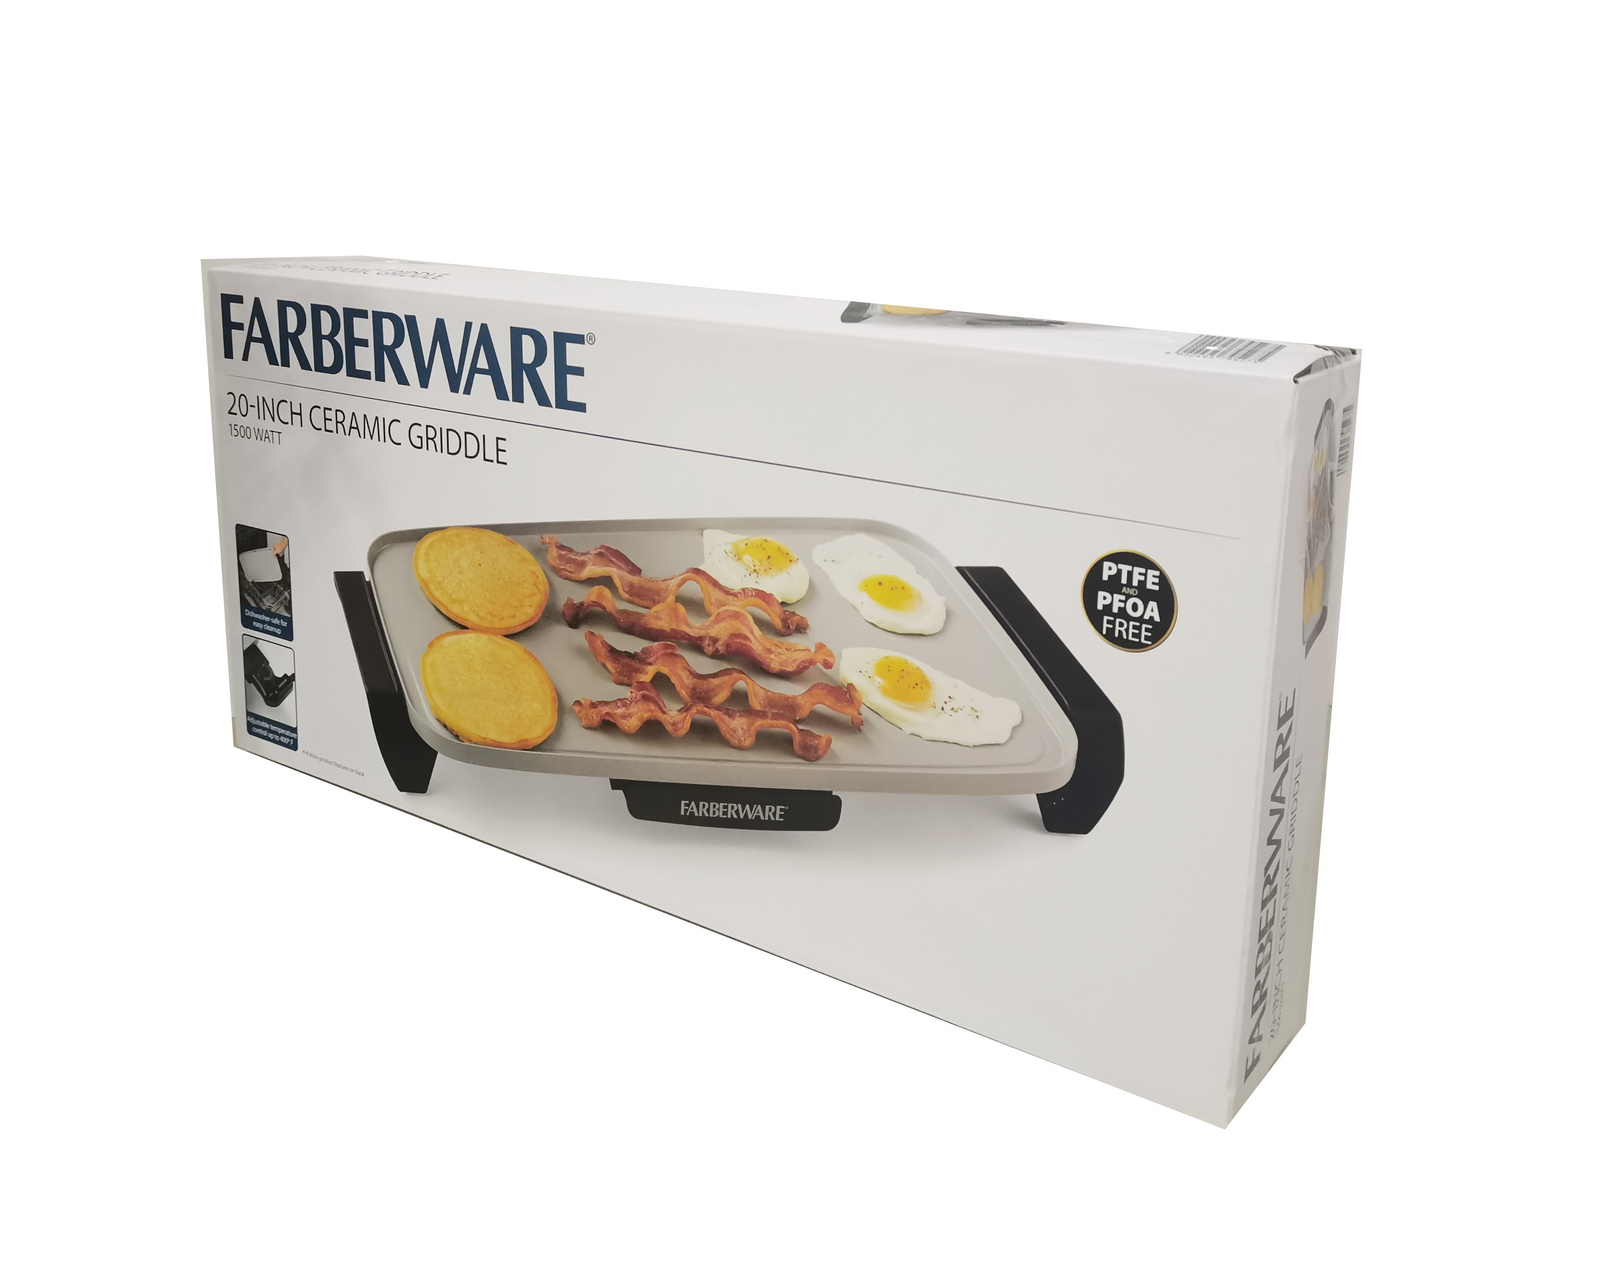 Farberware 10*20 inch Ceramic Coating Griddle, Gray, Nonstick, New - image 5 of 5